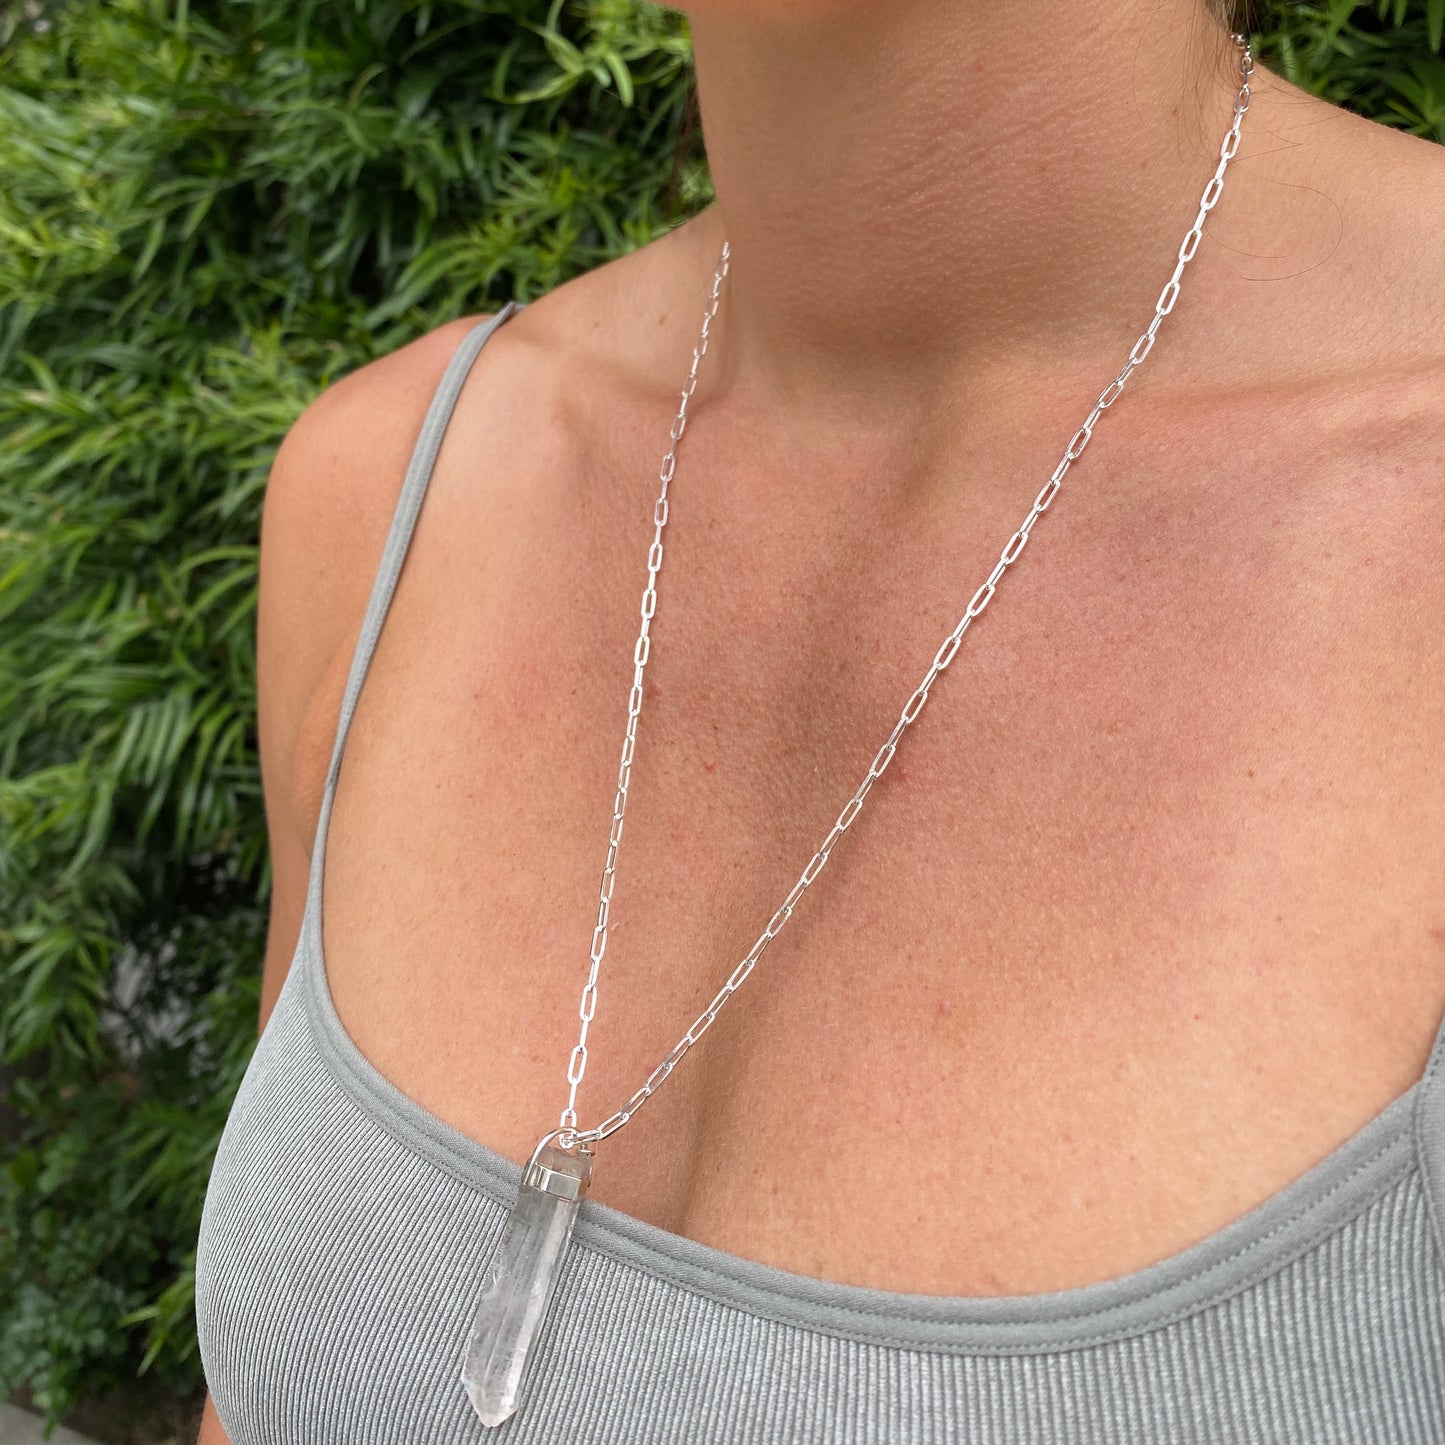 Raw, clear quartz pendant necklace with sterling silver chain. 24" necklace.